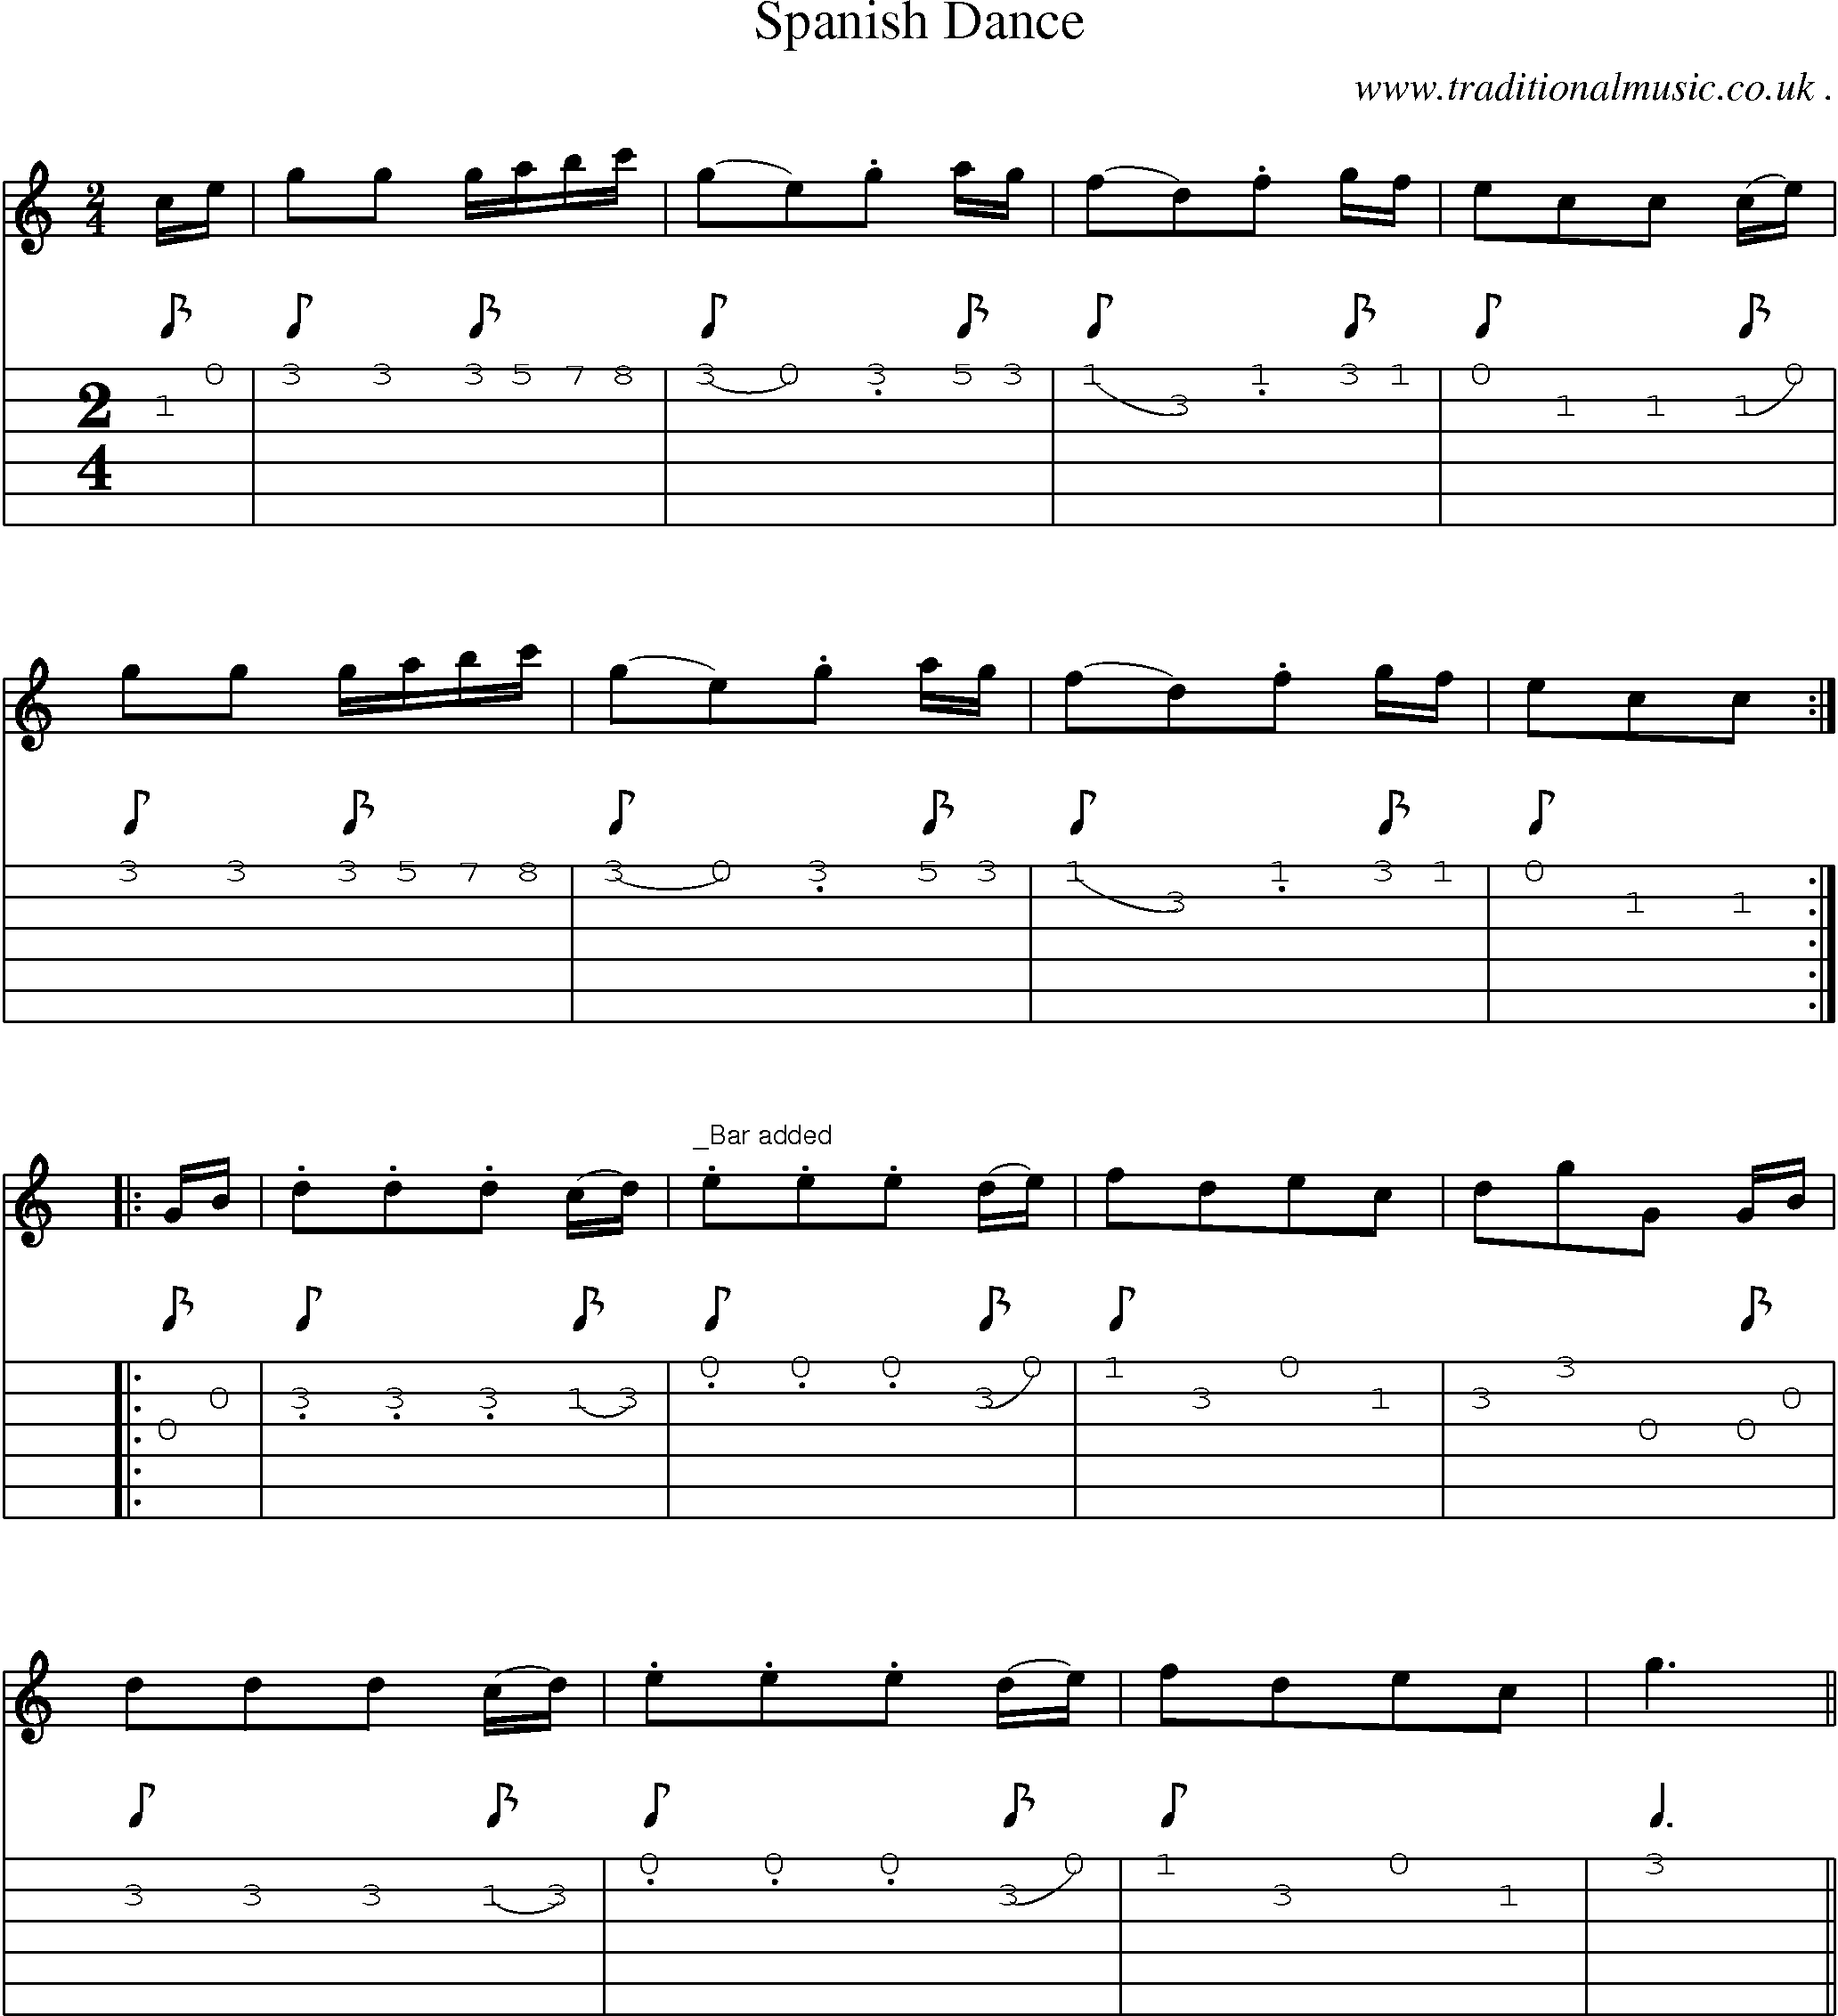 Sheet-Music and Guitar Tabs for Spanish Dance